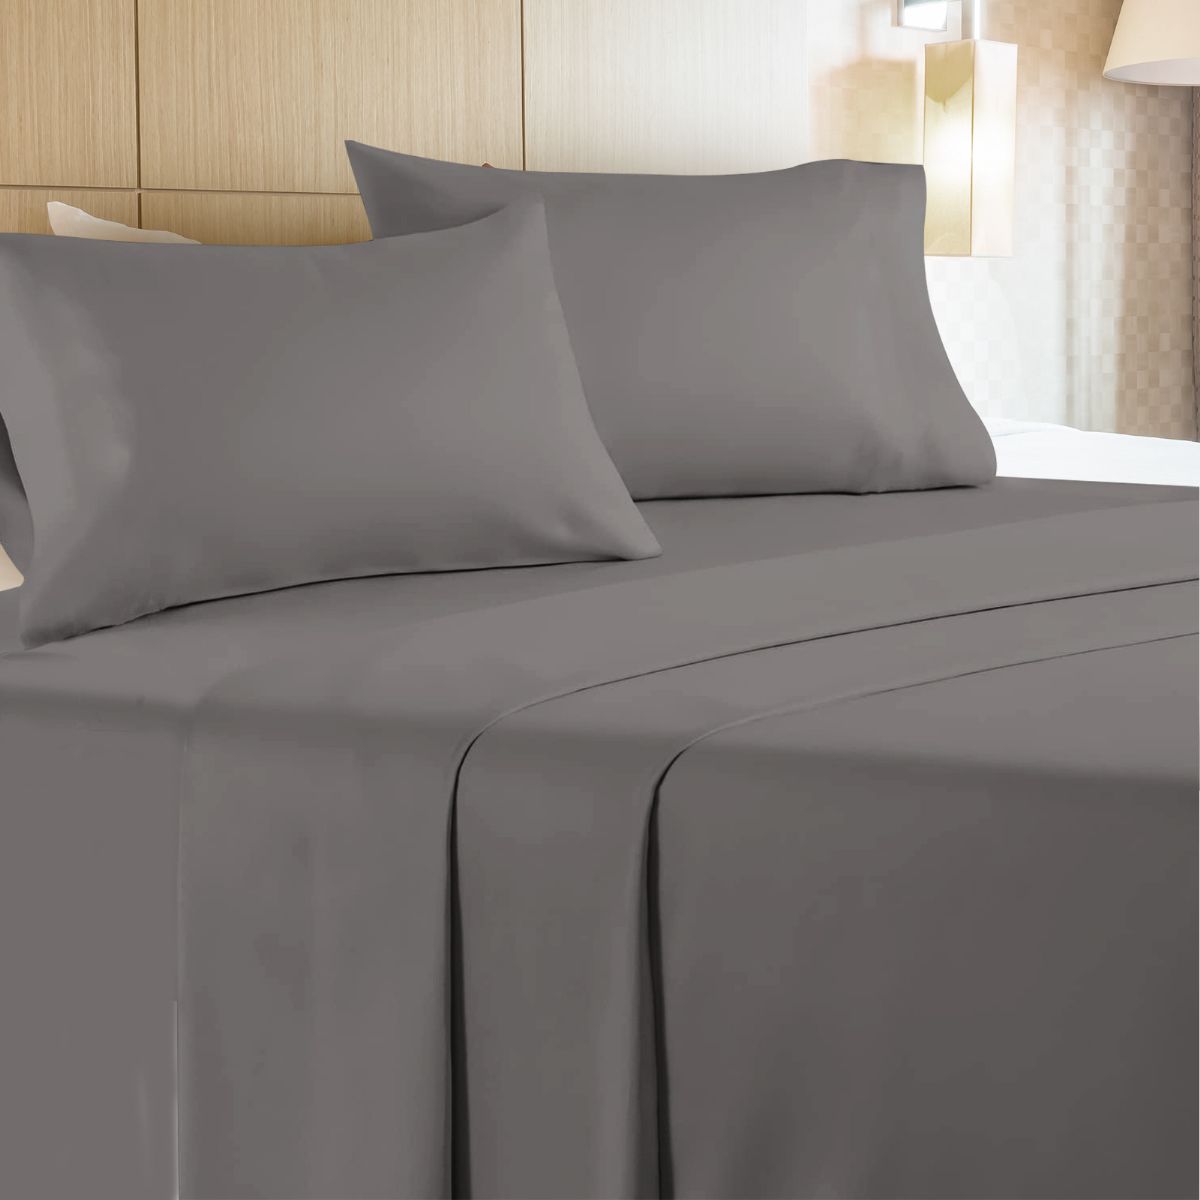 6 Wholesale 4 Piece Microfiber Bed Sheet Set King Size In Charcoal